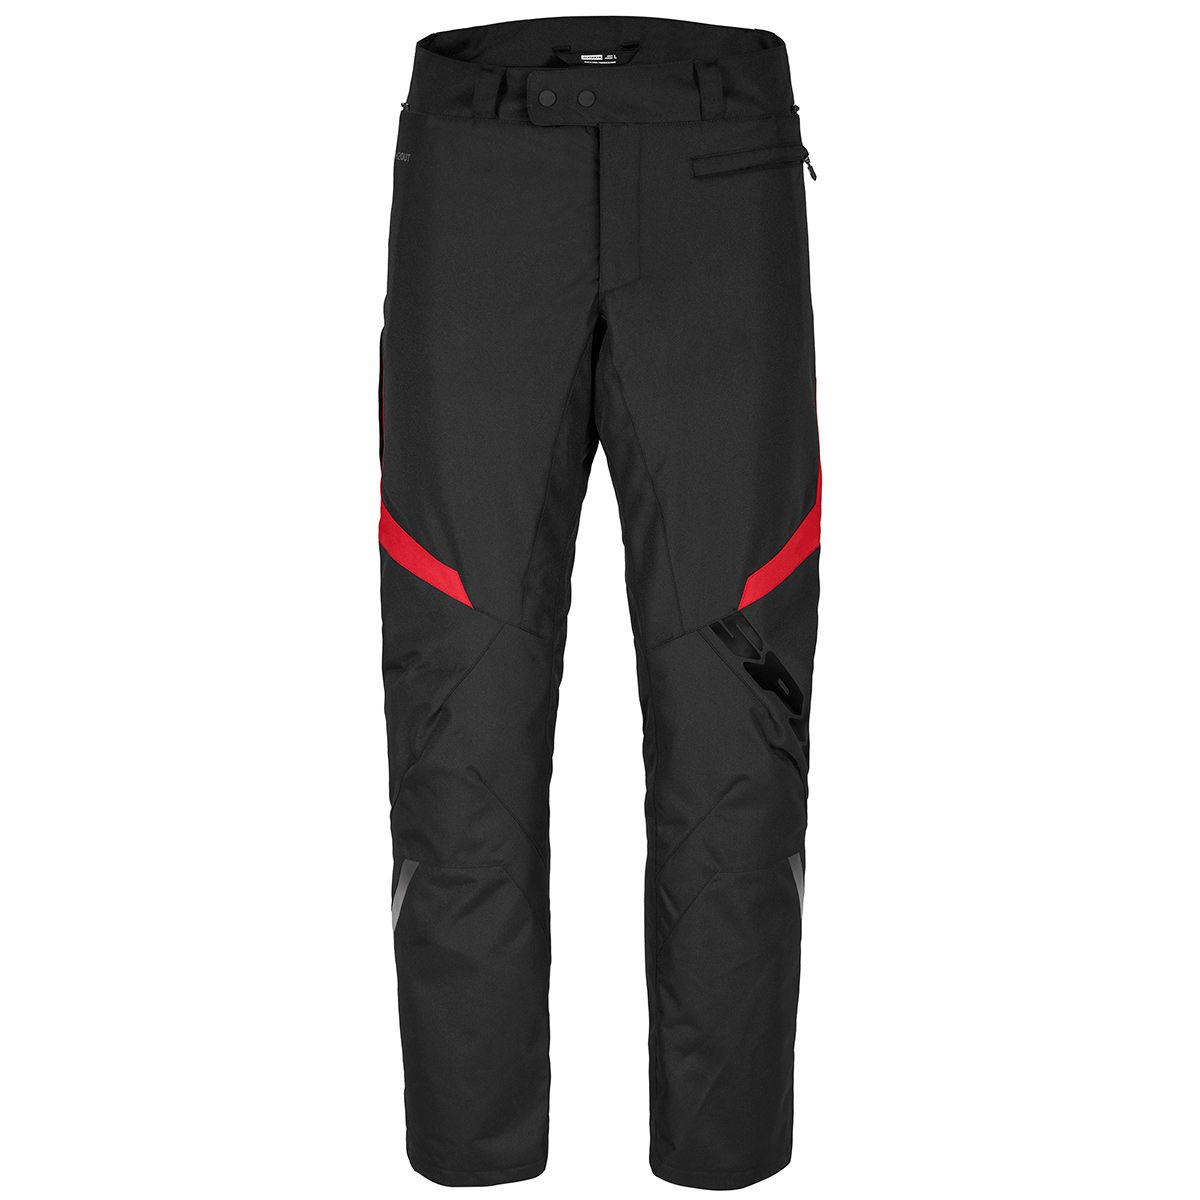 Image of Spidi Sportmaster Pants Black Red Size 3XL ID 8030161478242